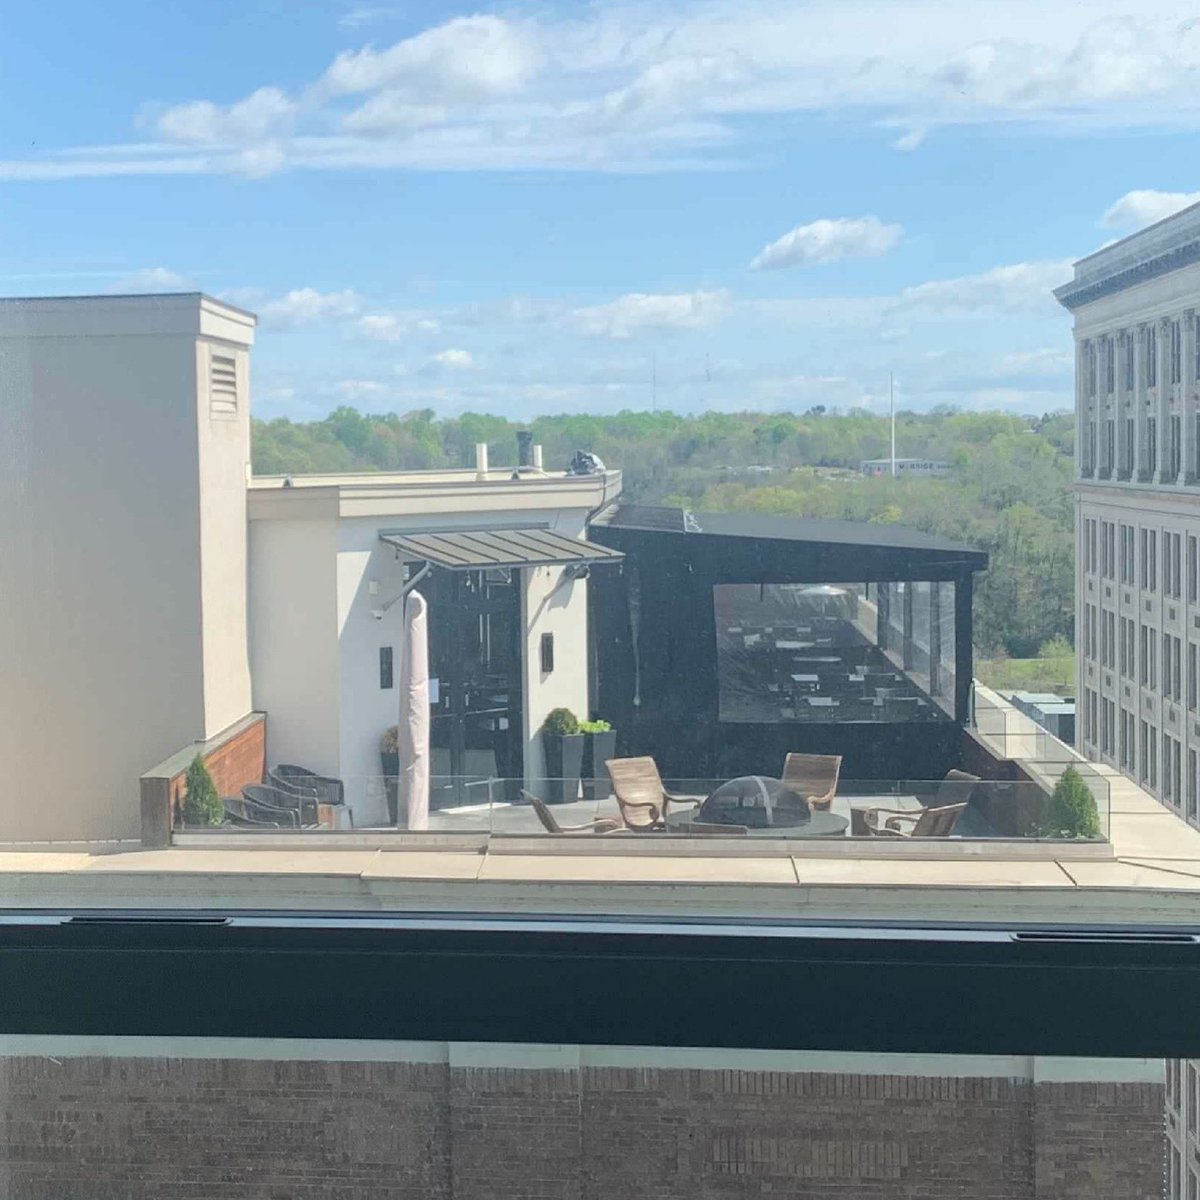 What downtown apartment has you THIS close to the rooftop Skyline restaurant? Get your tickets to the Downtown Loft Tour to find out! Link in bio. #freeclinicva #downtownliving #loftliving #fundraiser #downtownlynchburg #lynchburgva